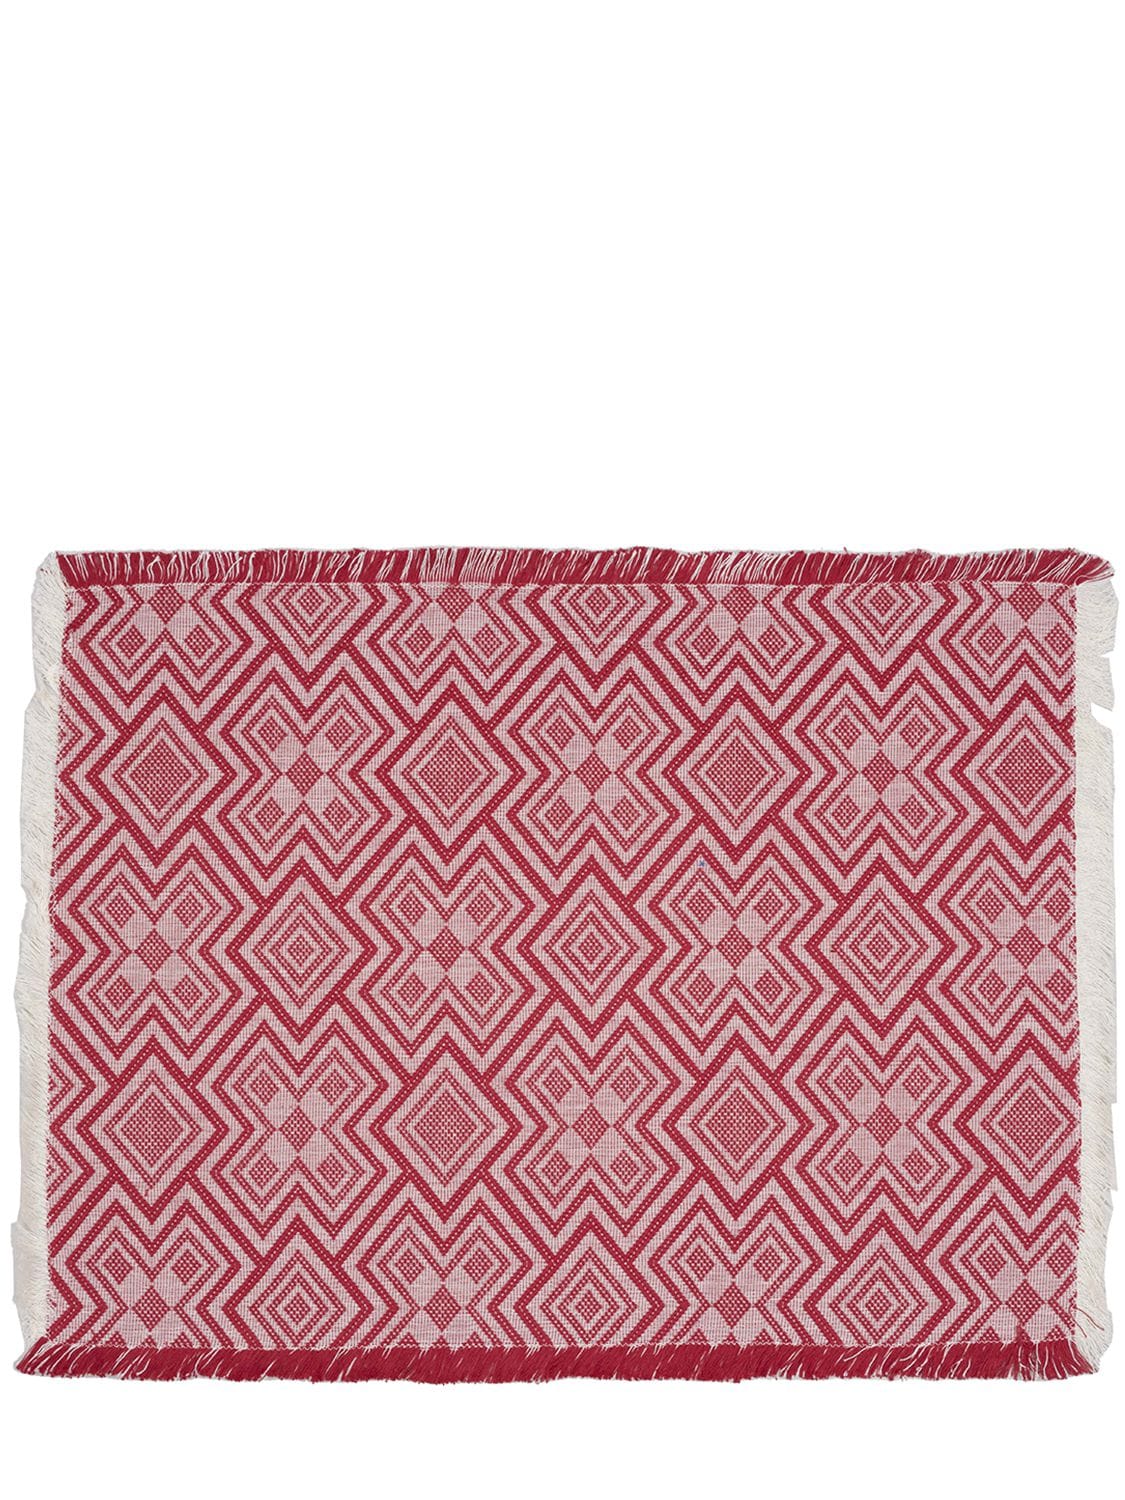 Cabana Salentina Placemat In Red